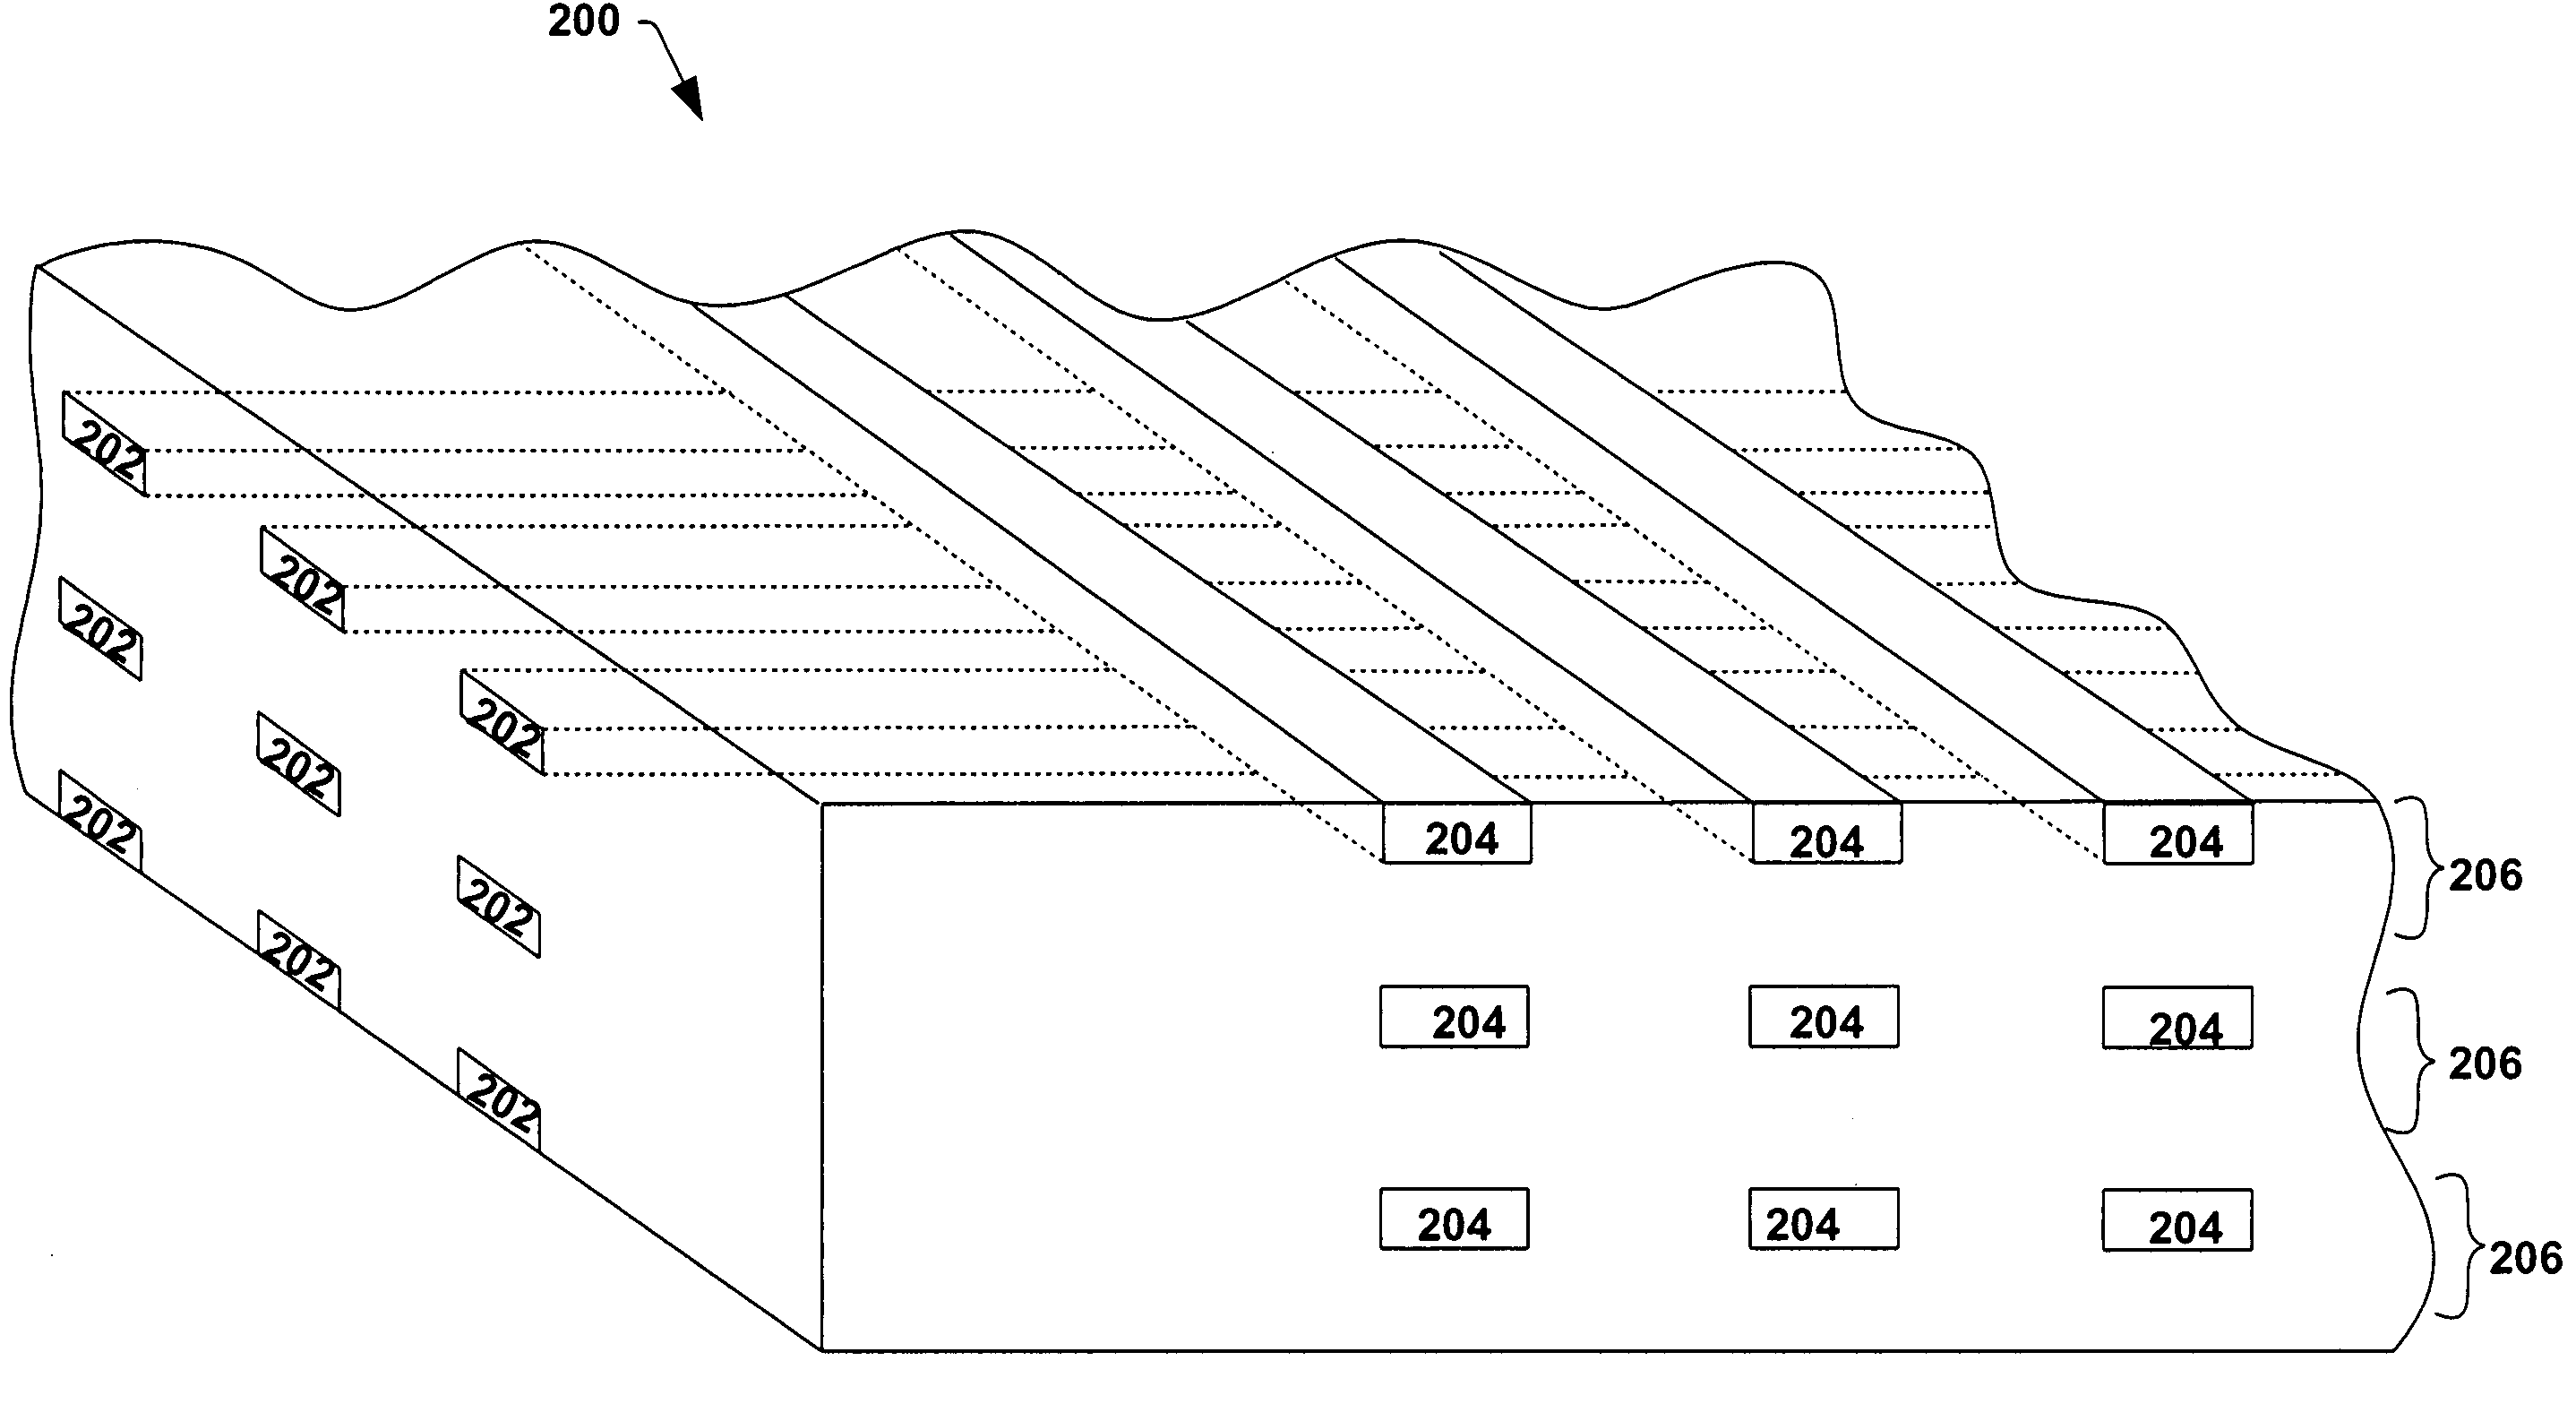 Memory device and methods of using and making the device